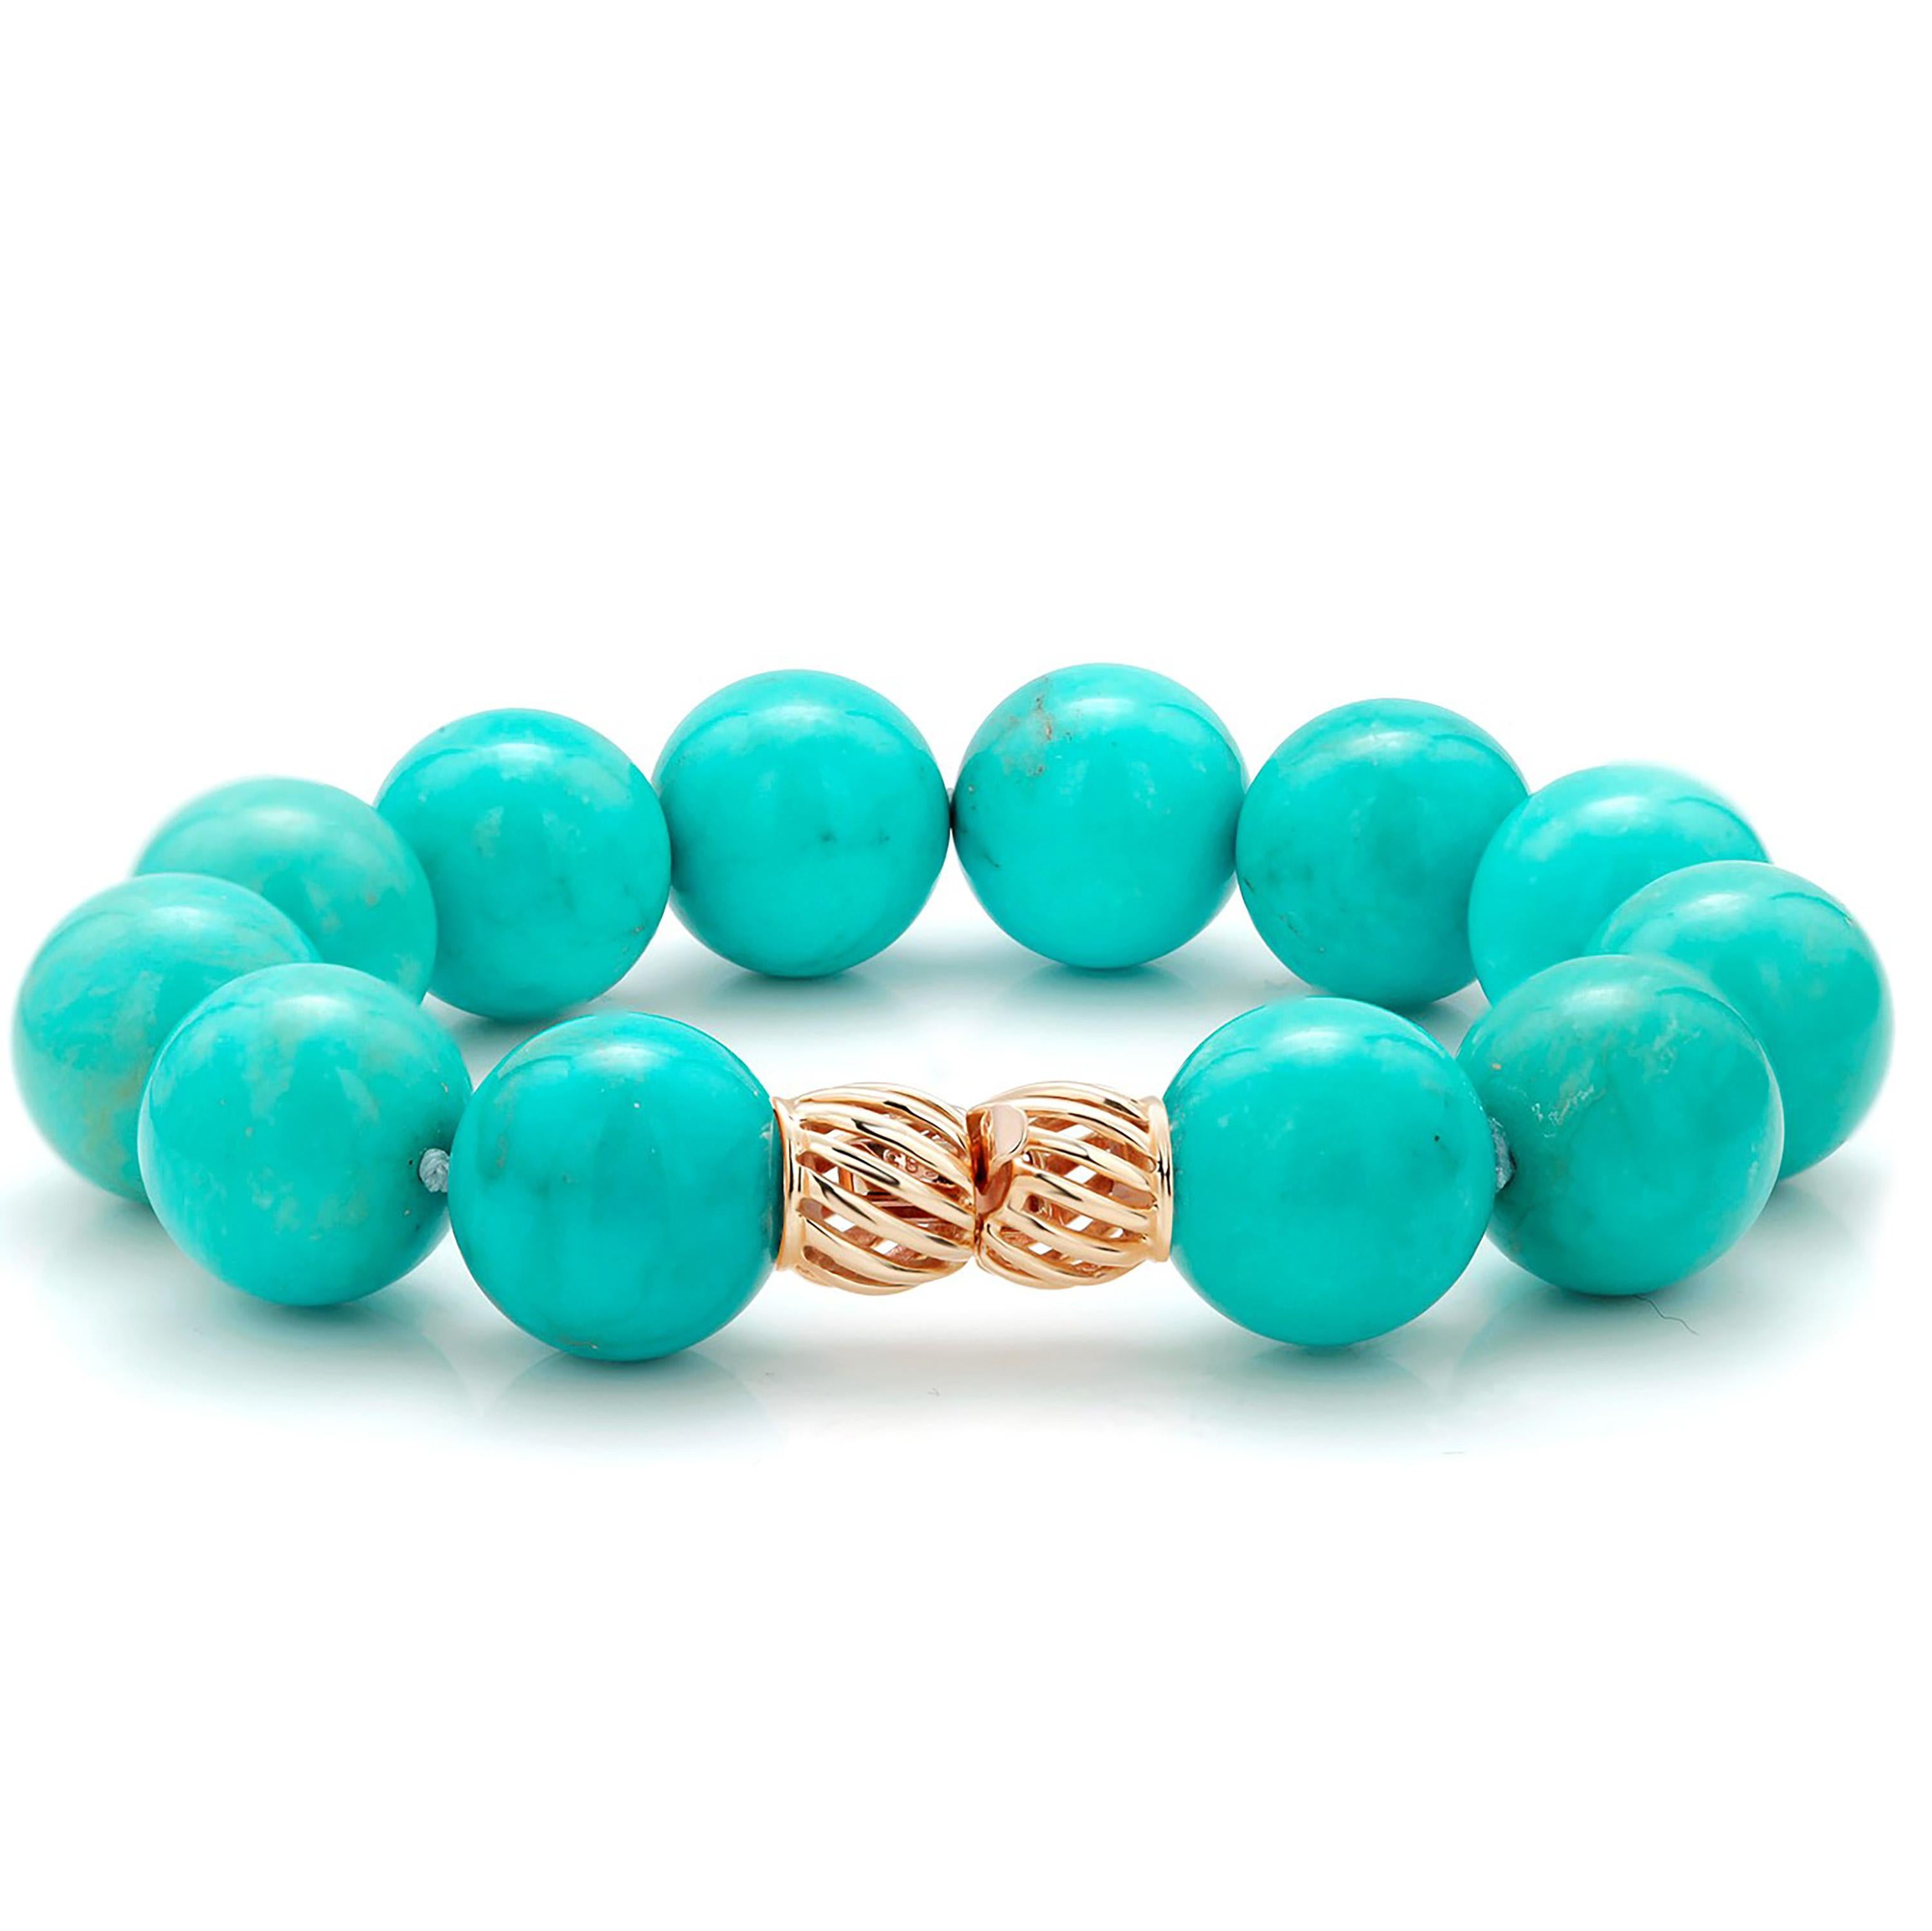 Contemporary Turquoise 14 Millimeter Bead Bracelet Yellow Gold Clasp 